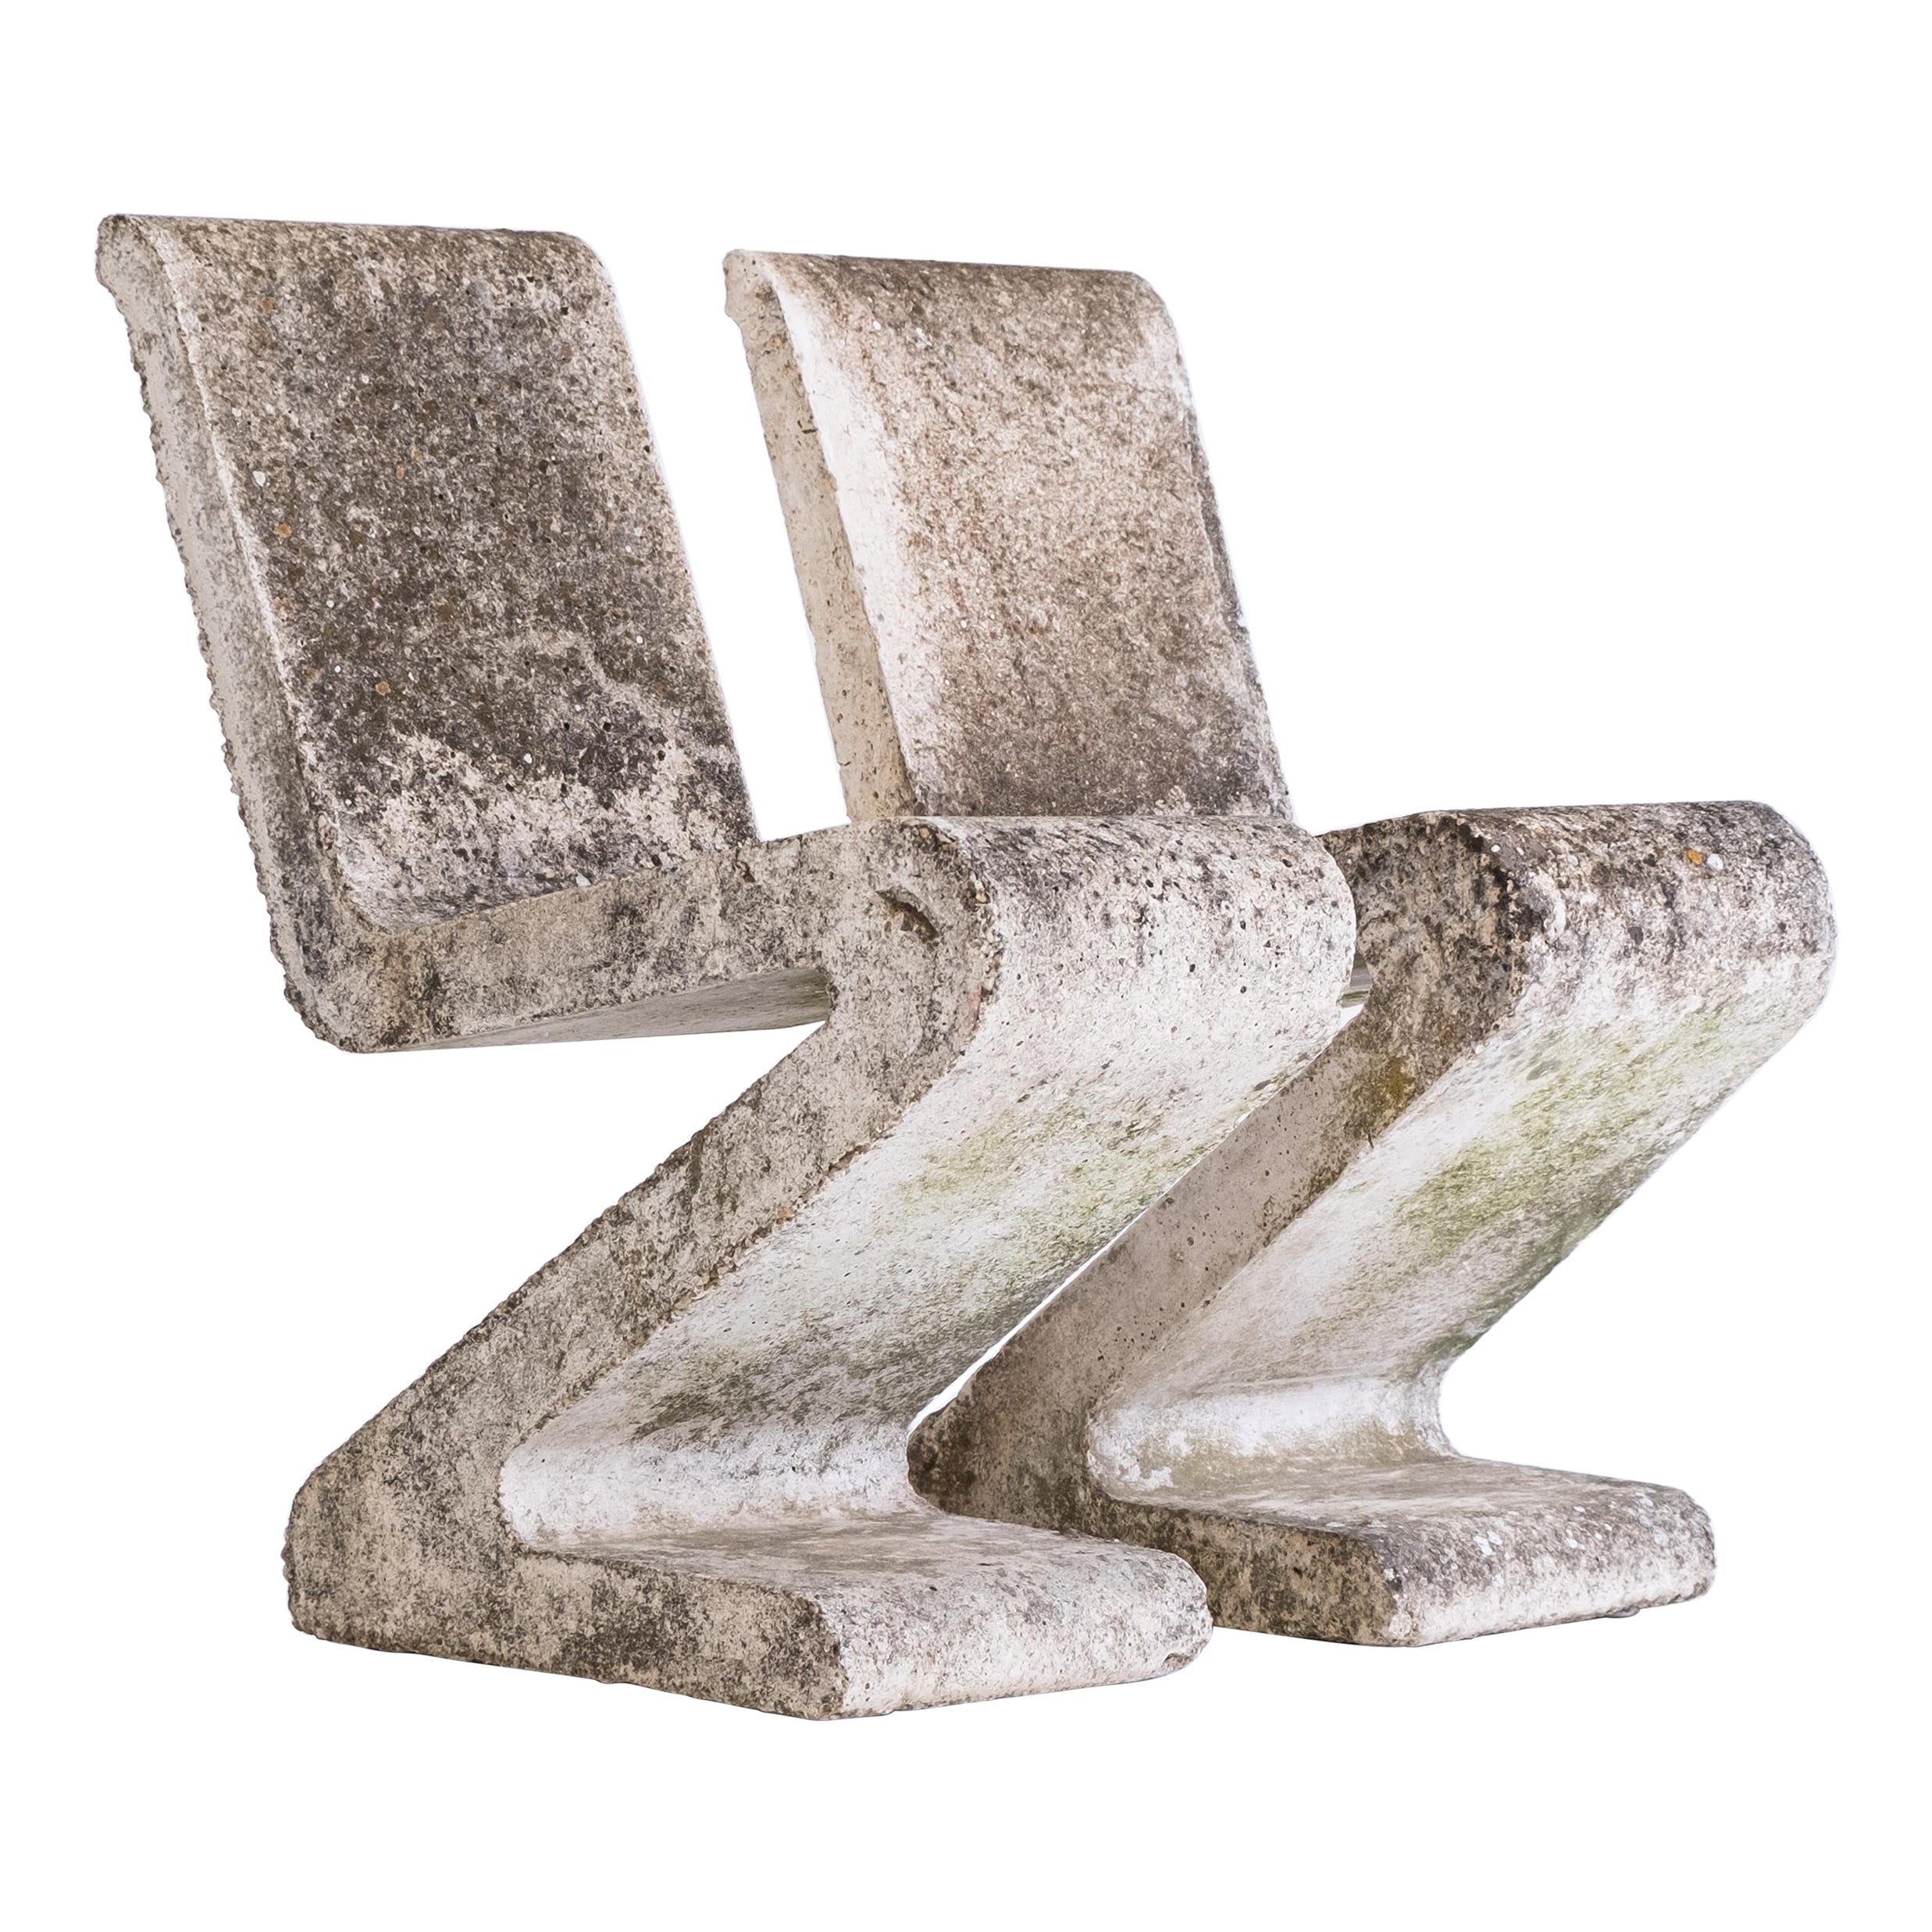 Brutalist Pair of Concrete Zig Zag Chairs, France, ca. 1970s